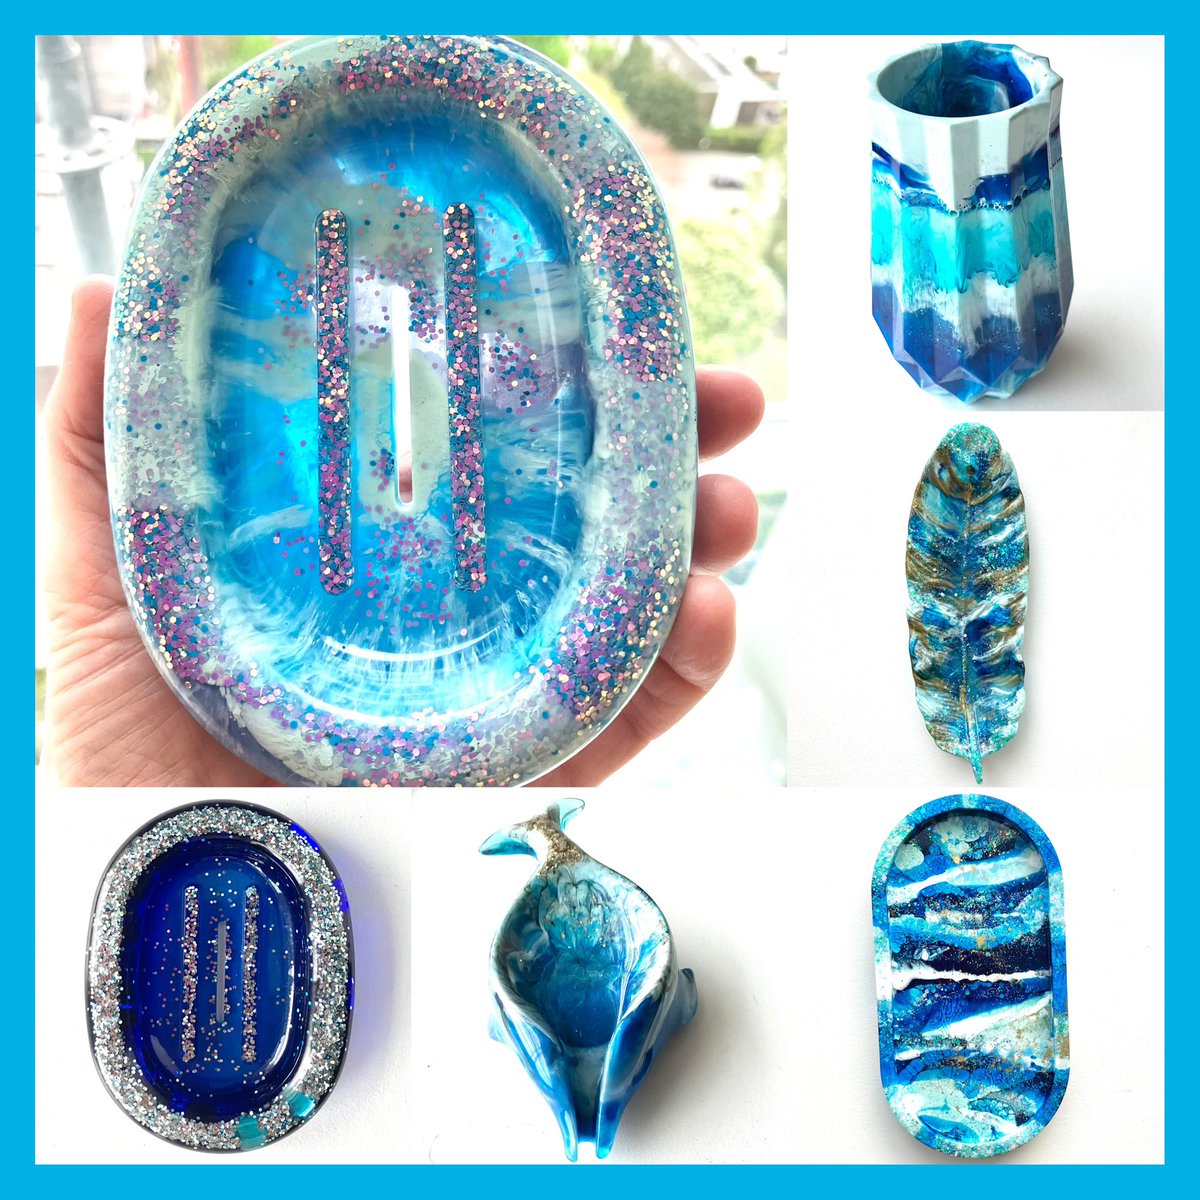 Excited to share the resin blues, stunning soap dish, pencil pot, feather dish & dolphins soap holder: muresindesigns.etsy.com #earlybiz #ukmakers #craftbizparty #etsy #handmadegift #etsyfinds